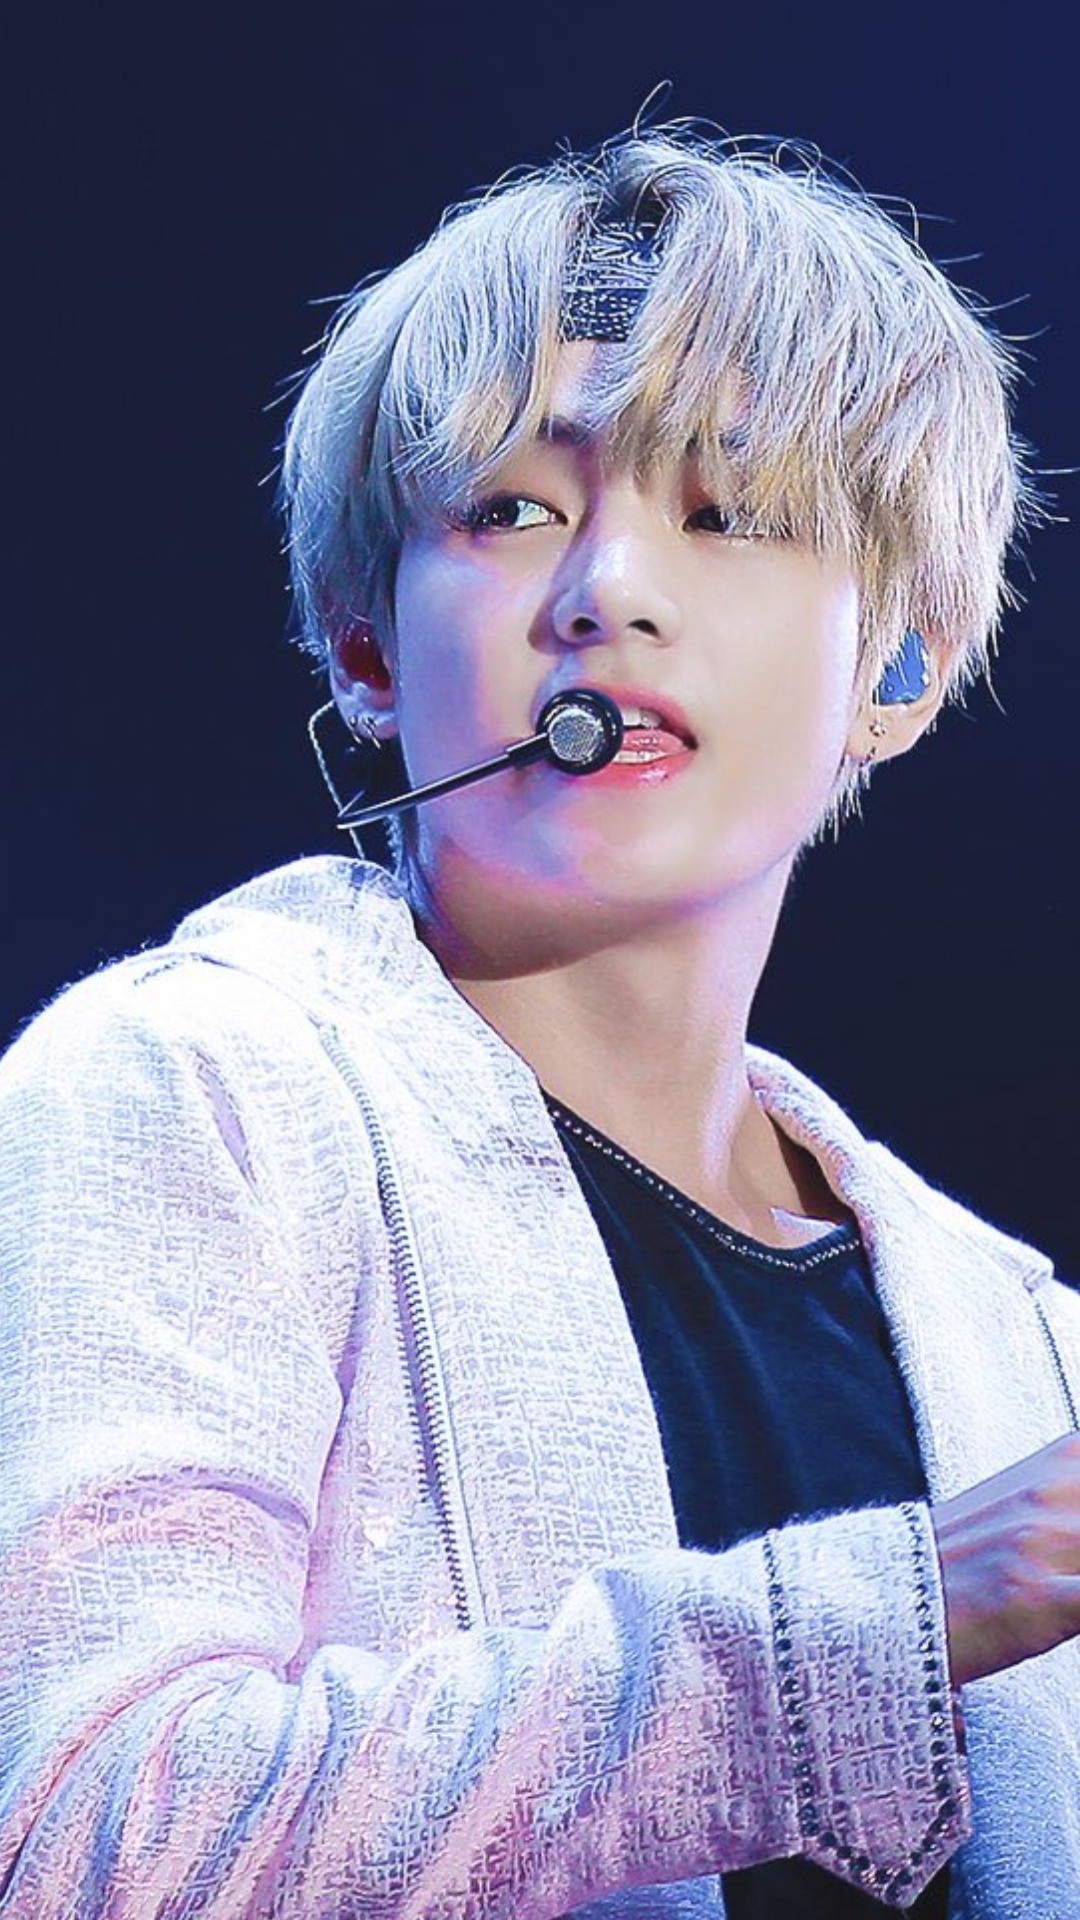 taehyung wallpaper,hair,hairstyle,chin,nose,forehead